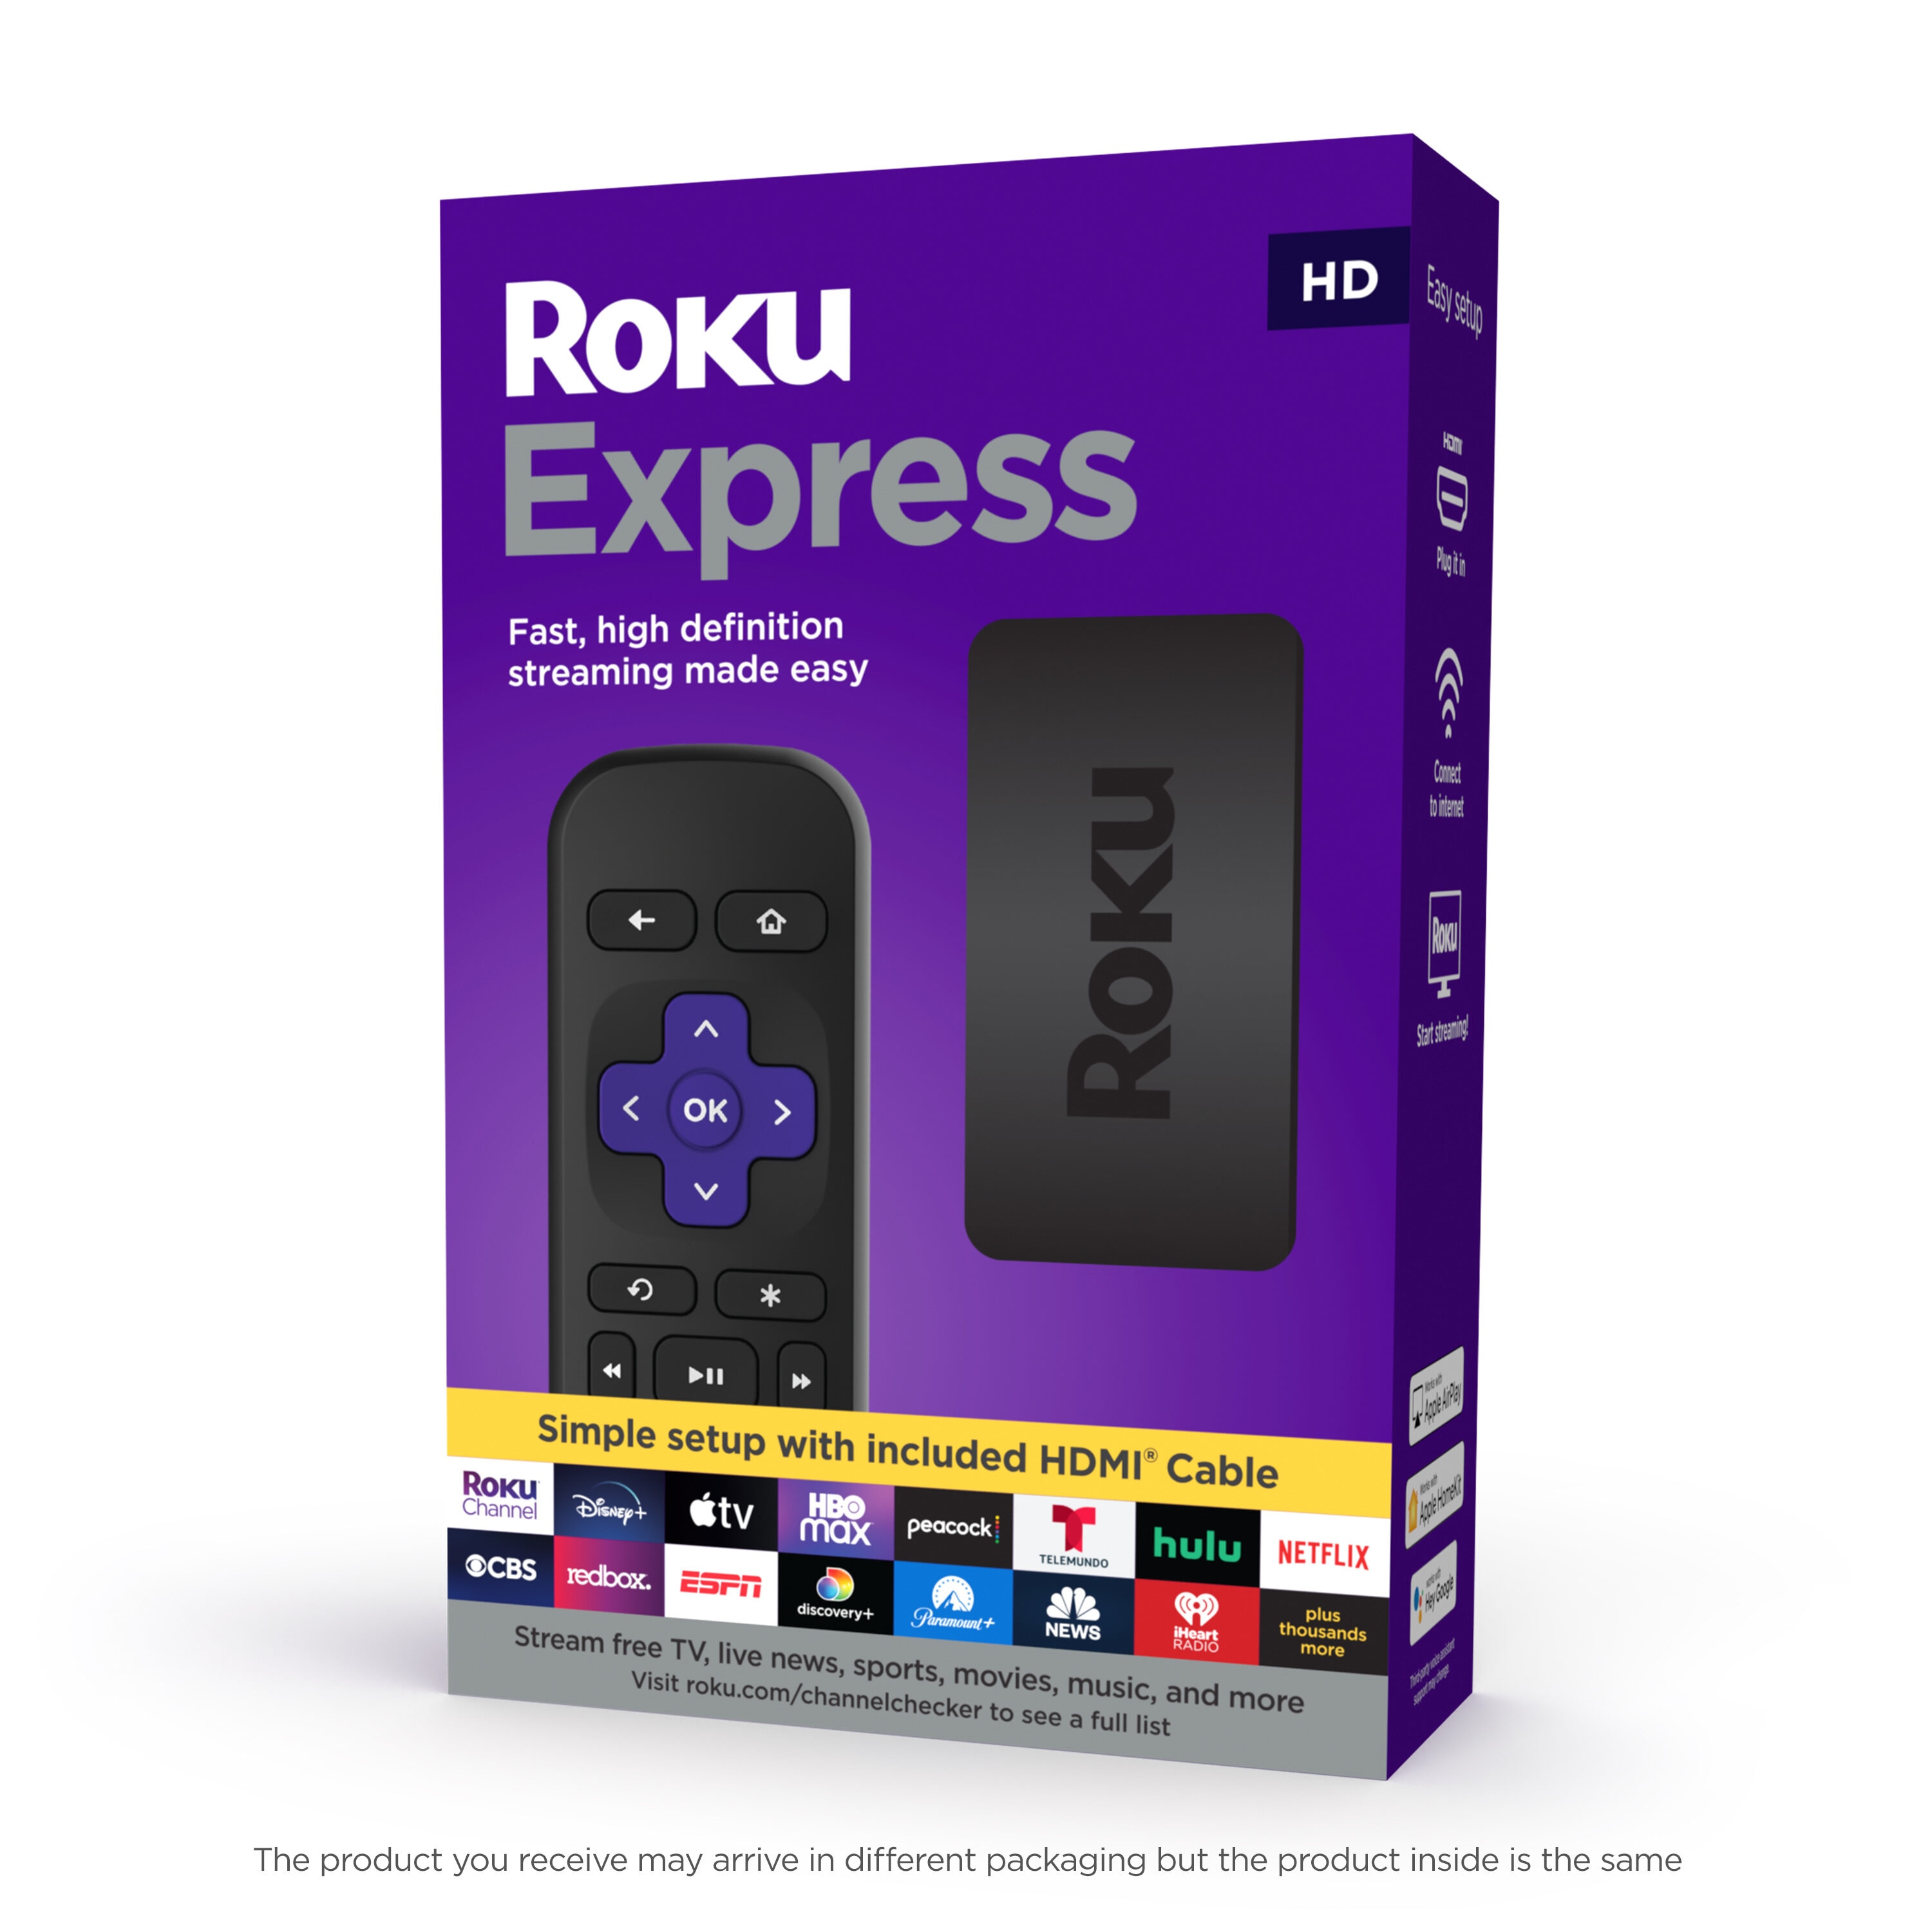 Roku Express Hd Streaming Device with Remote Control Included at 